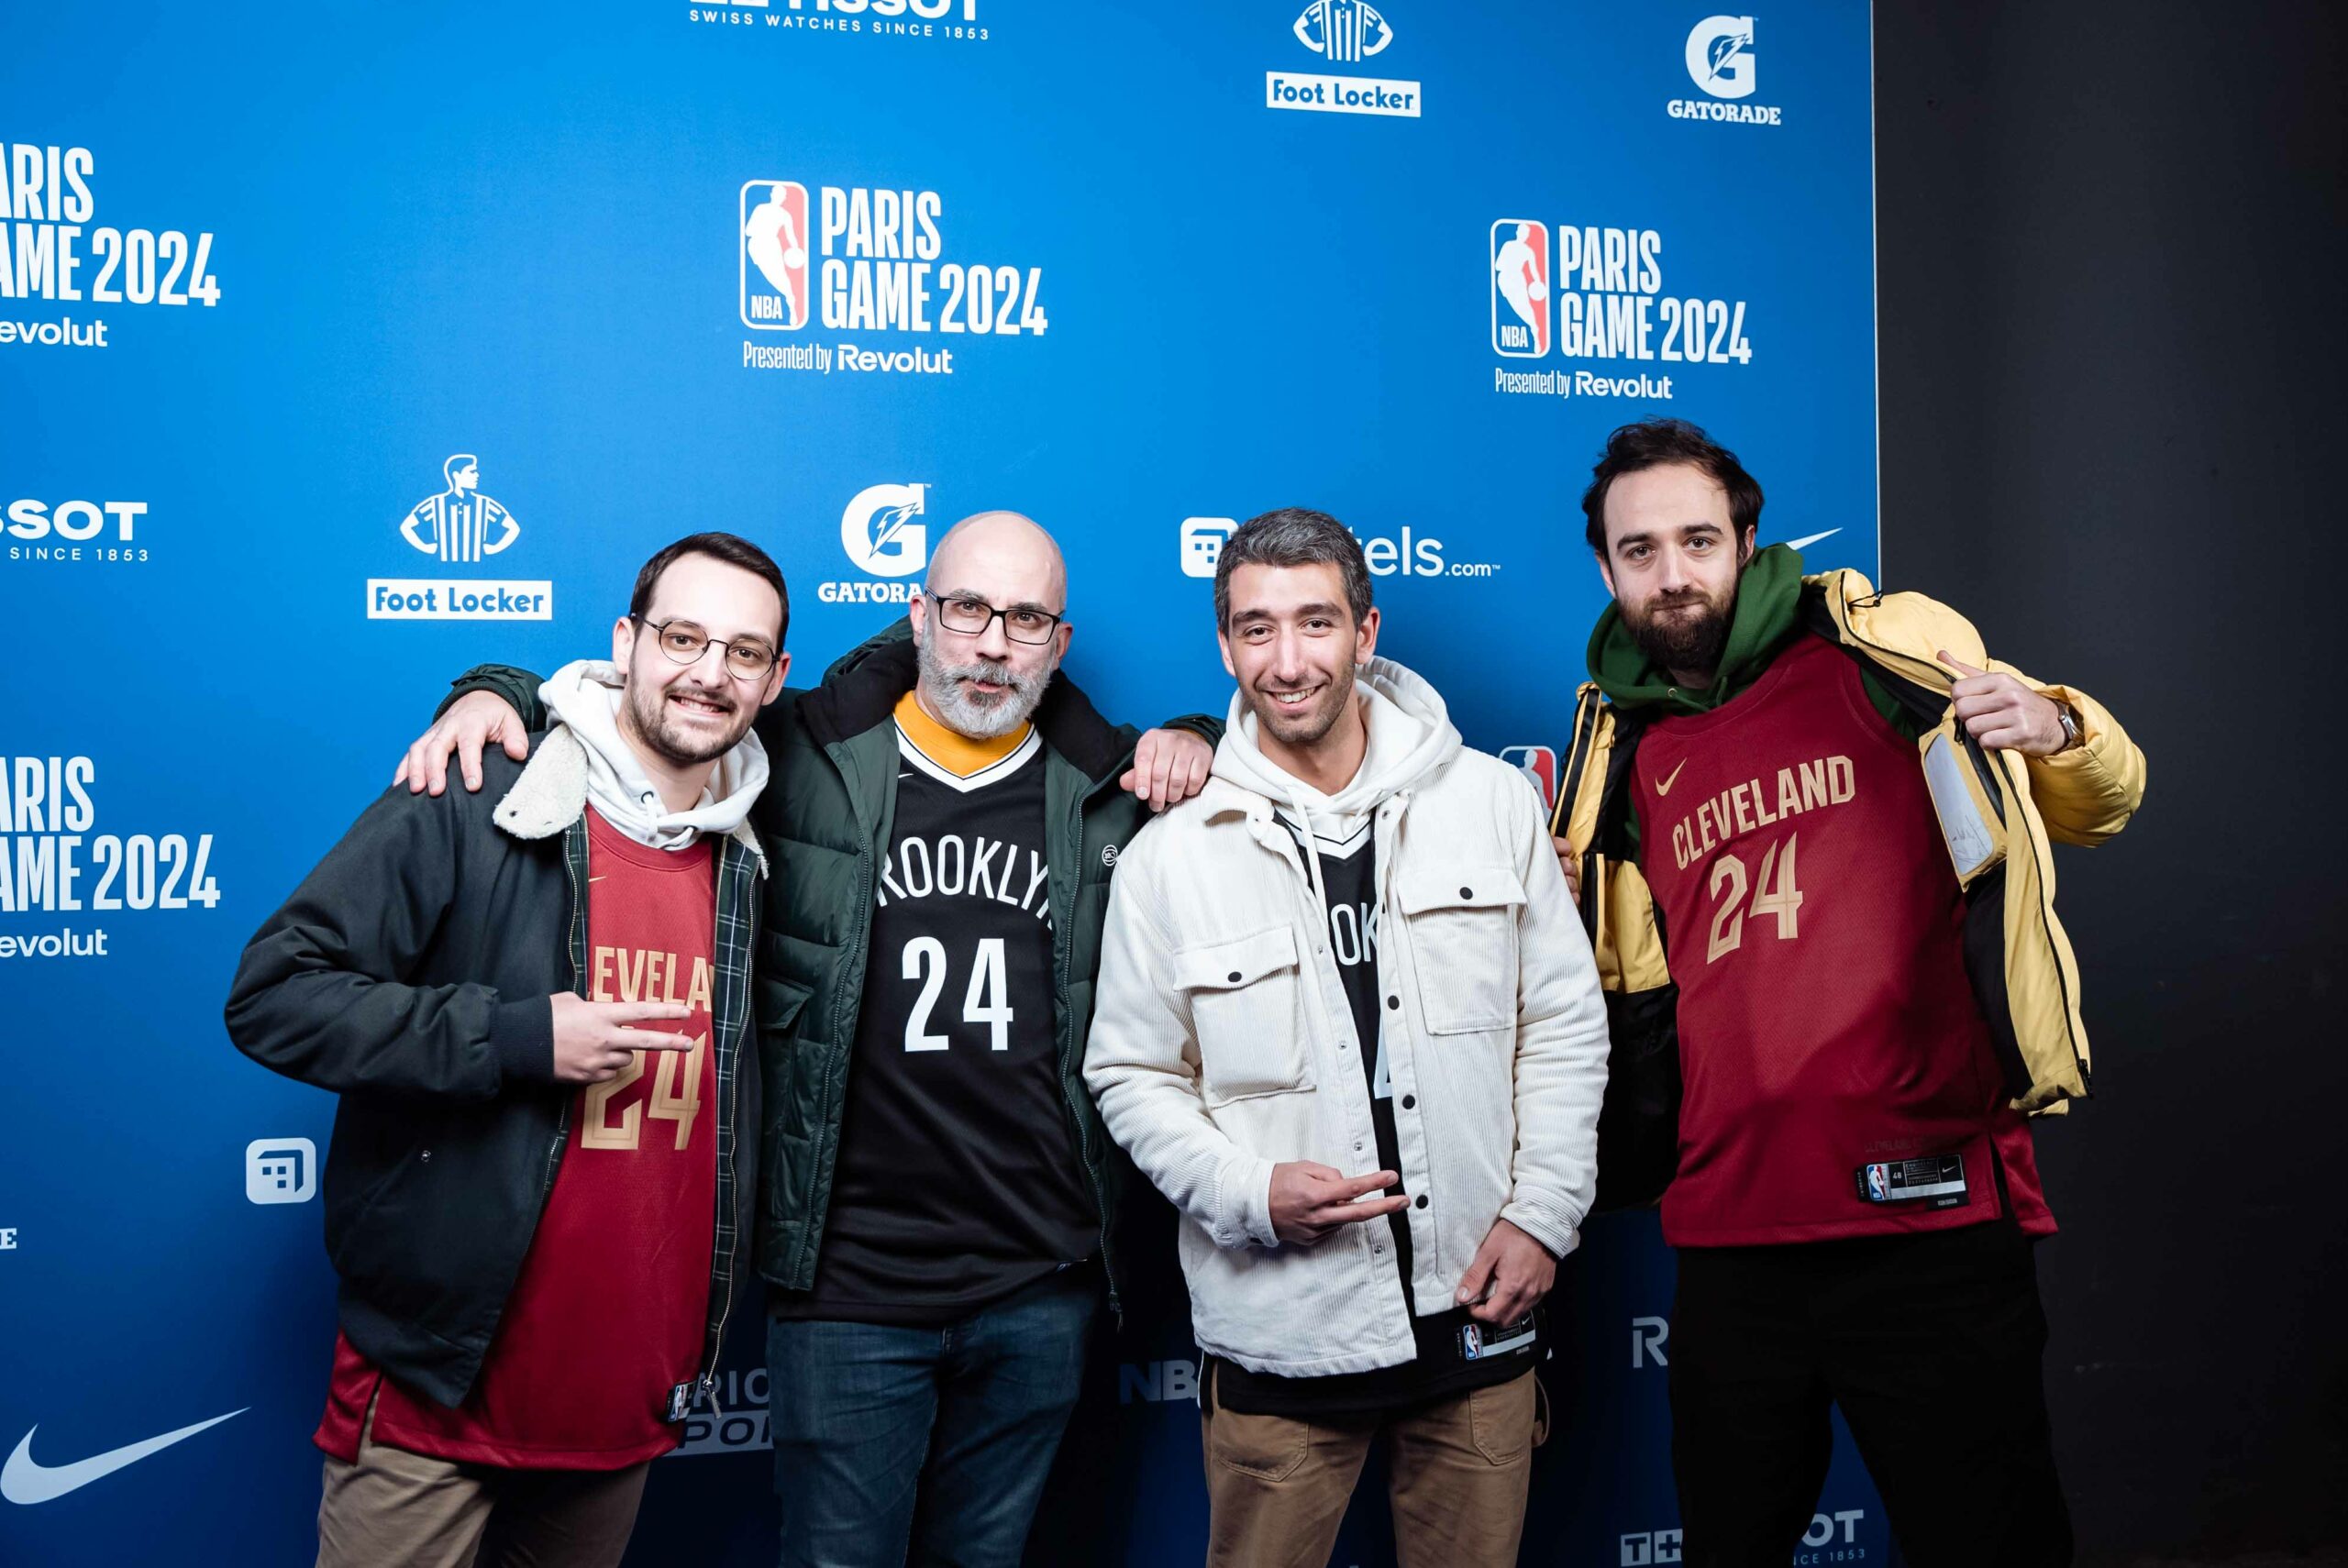 A Day to Remember Experiencing the NBA Paris Game 2024 Archysport